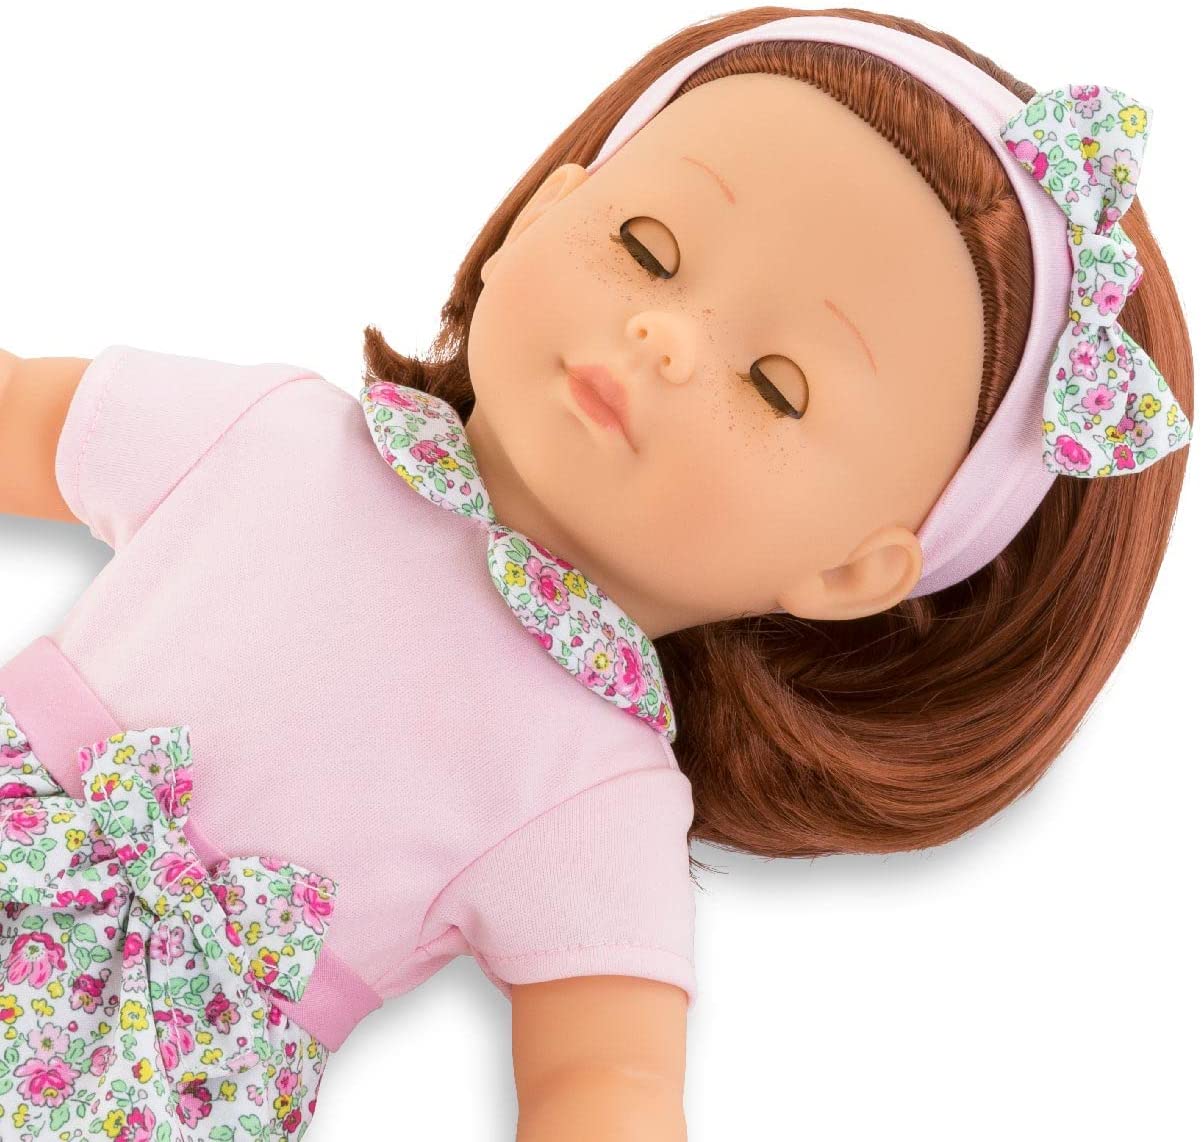 (OPEN BOX) Corolle Ma Corolle Pia 14" Doll - with Pink Floral Outfit and Matching Headband, Soft-Body, Sleeping Eyes and Vanilla Scent, for Ages 4 Years and up